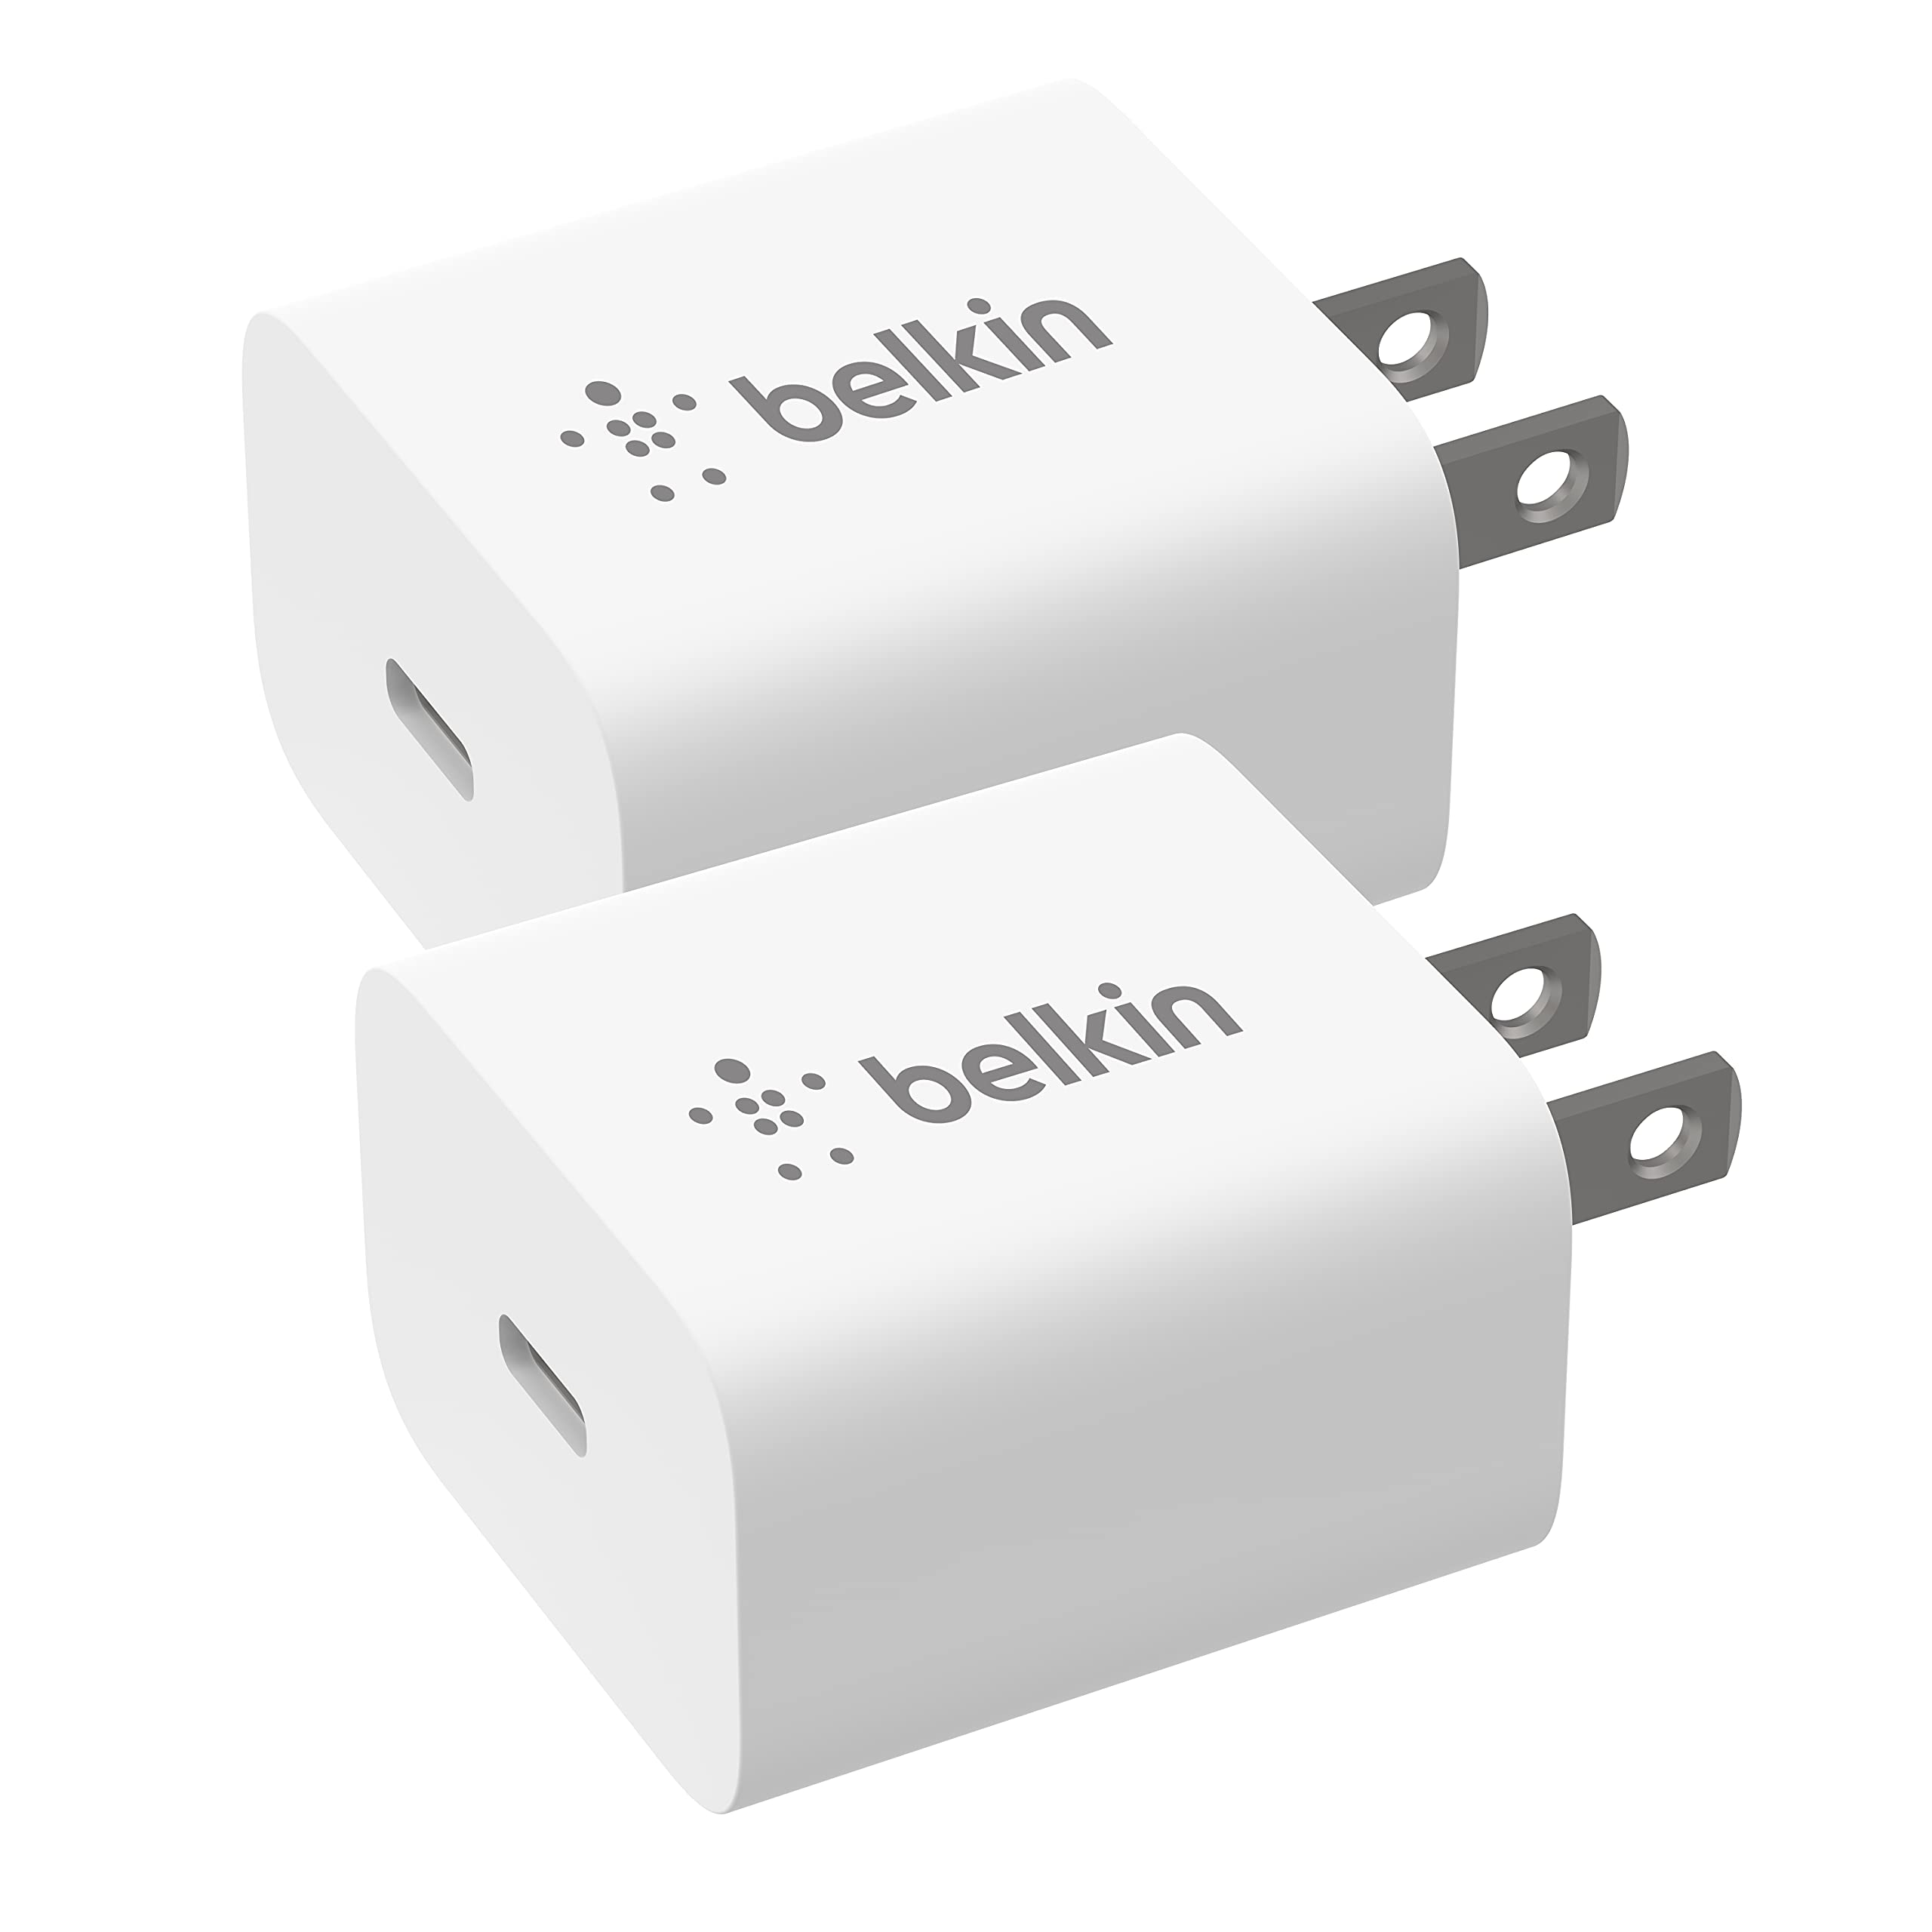 Belkin 20 Watt Wall Charger - USB Type C Fast Charging Block for iPhone 14, 14 Pro, 14 Pro Max, 13, 13 Pro, 13 Pro Max, Galaxy S21 Ultra, iPad, AirPods & More - (2-Pack)